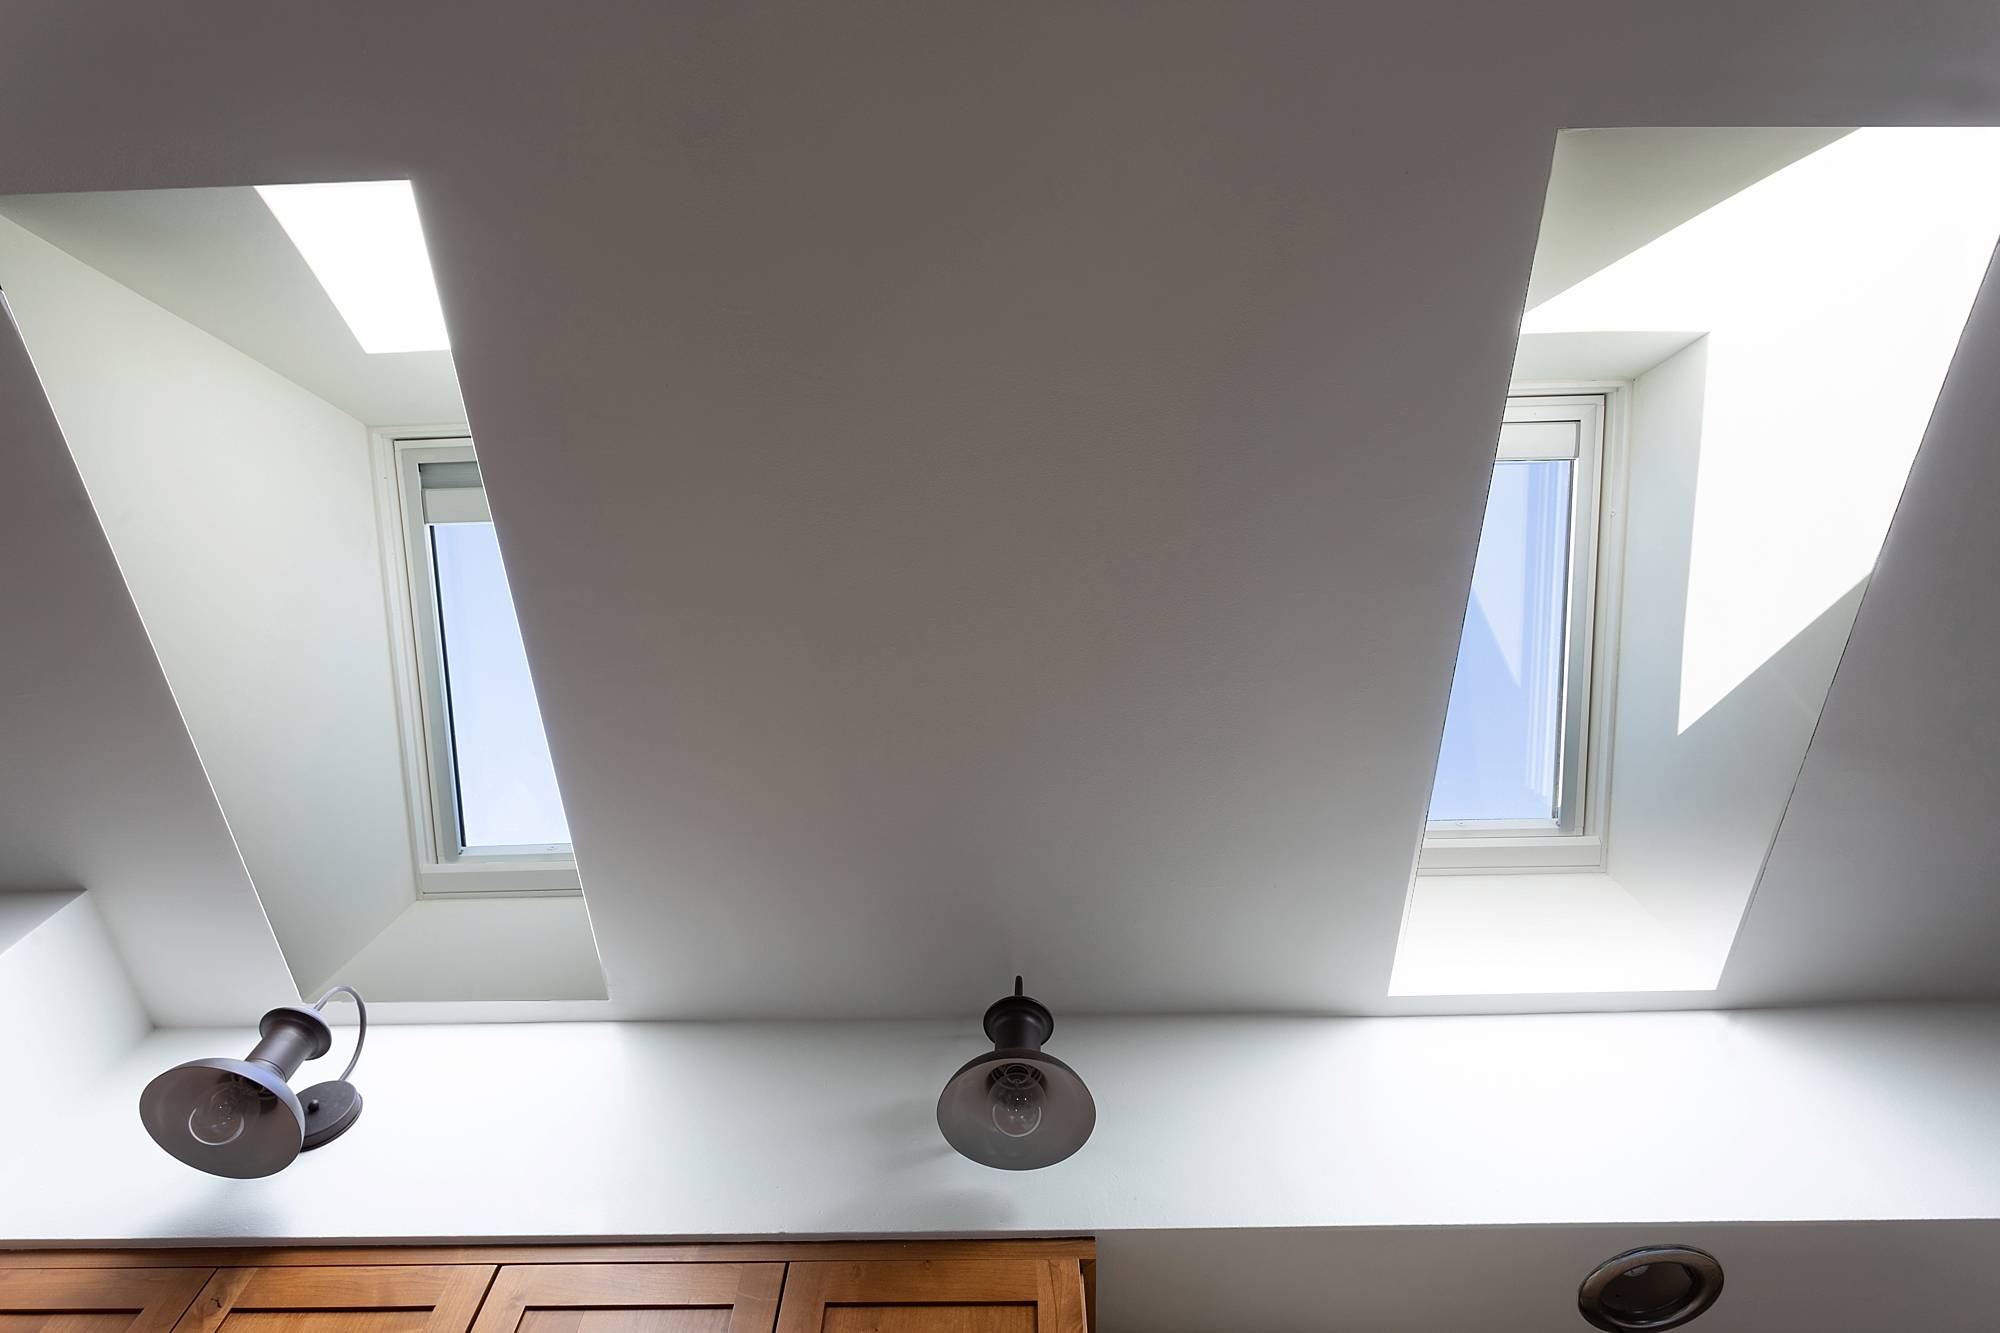 Skylights in the kitchen with VELUX - see before and after photos in this huge blog post